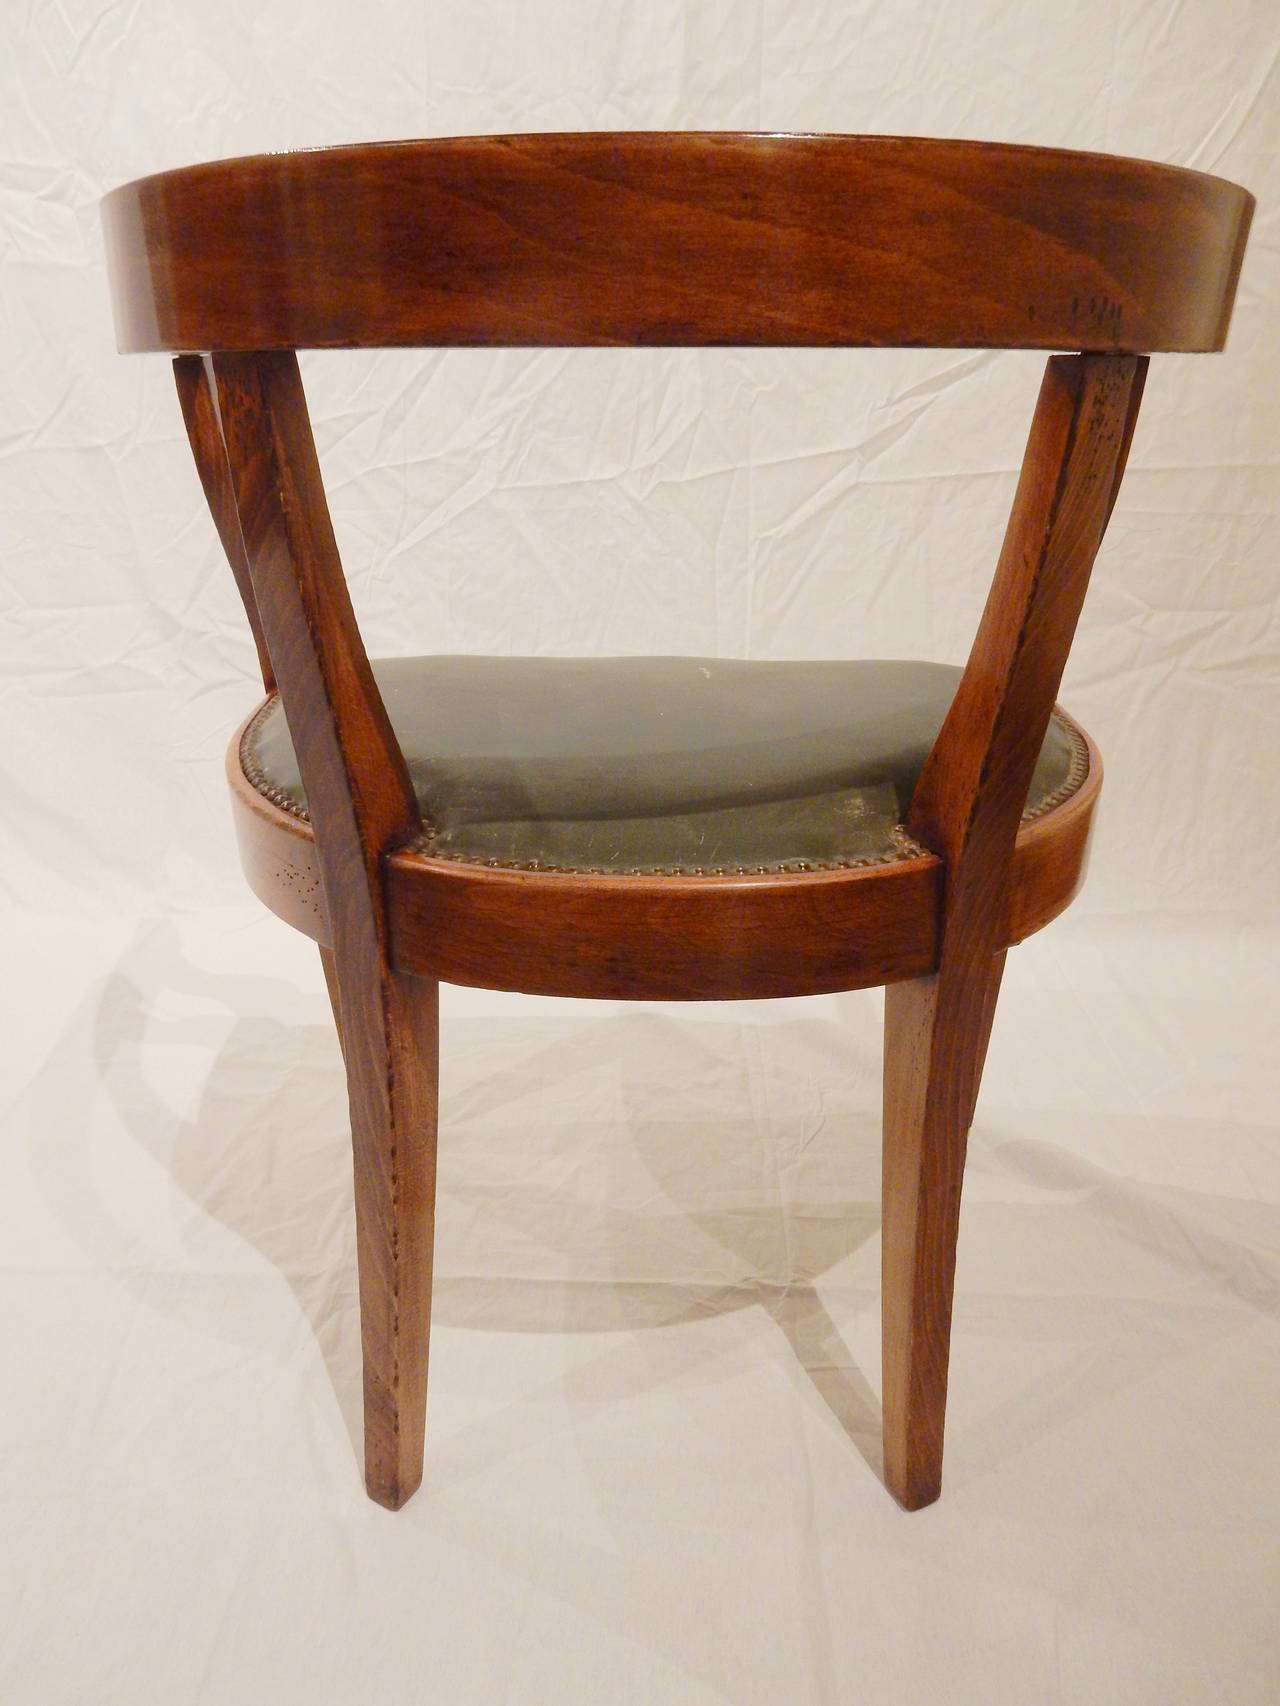 Late 19th Century Desk Chair In Good Condition For Sale In New Orleans, LA